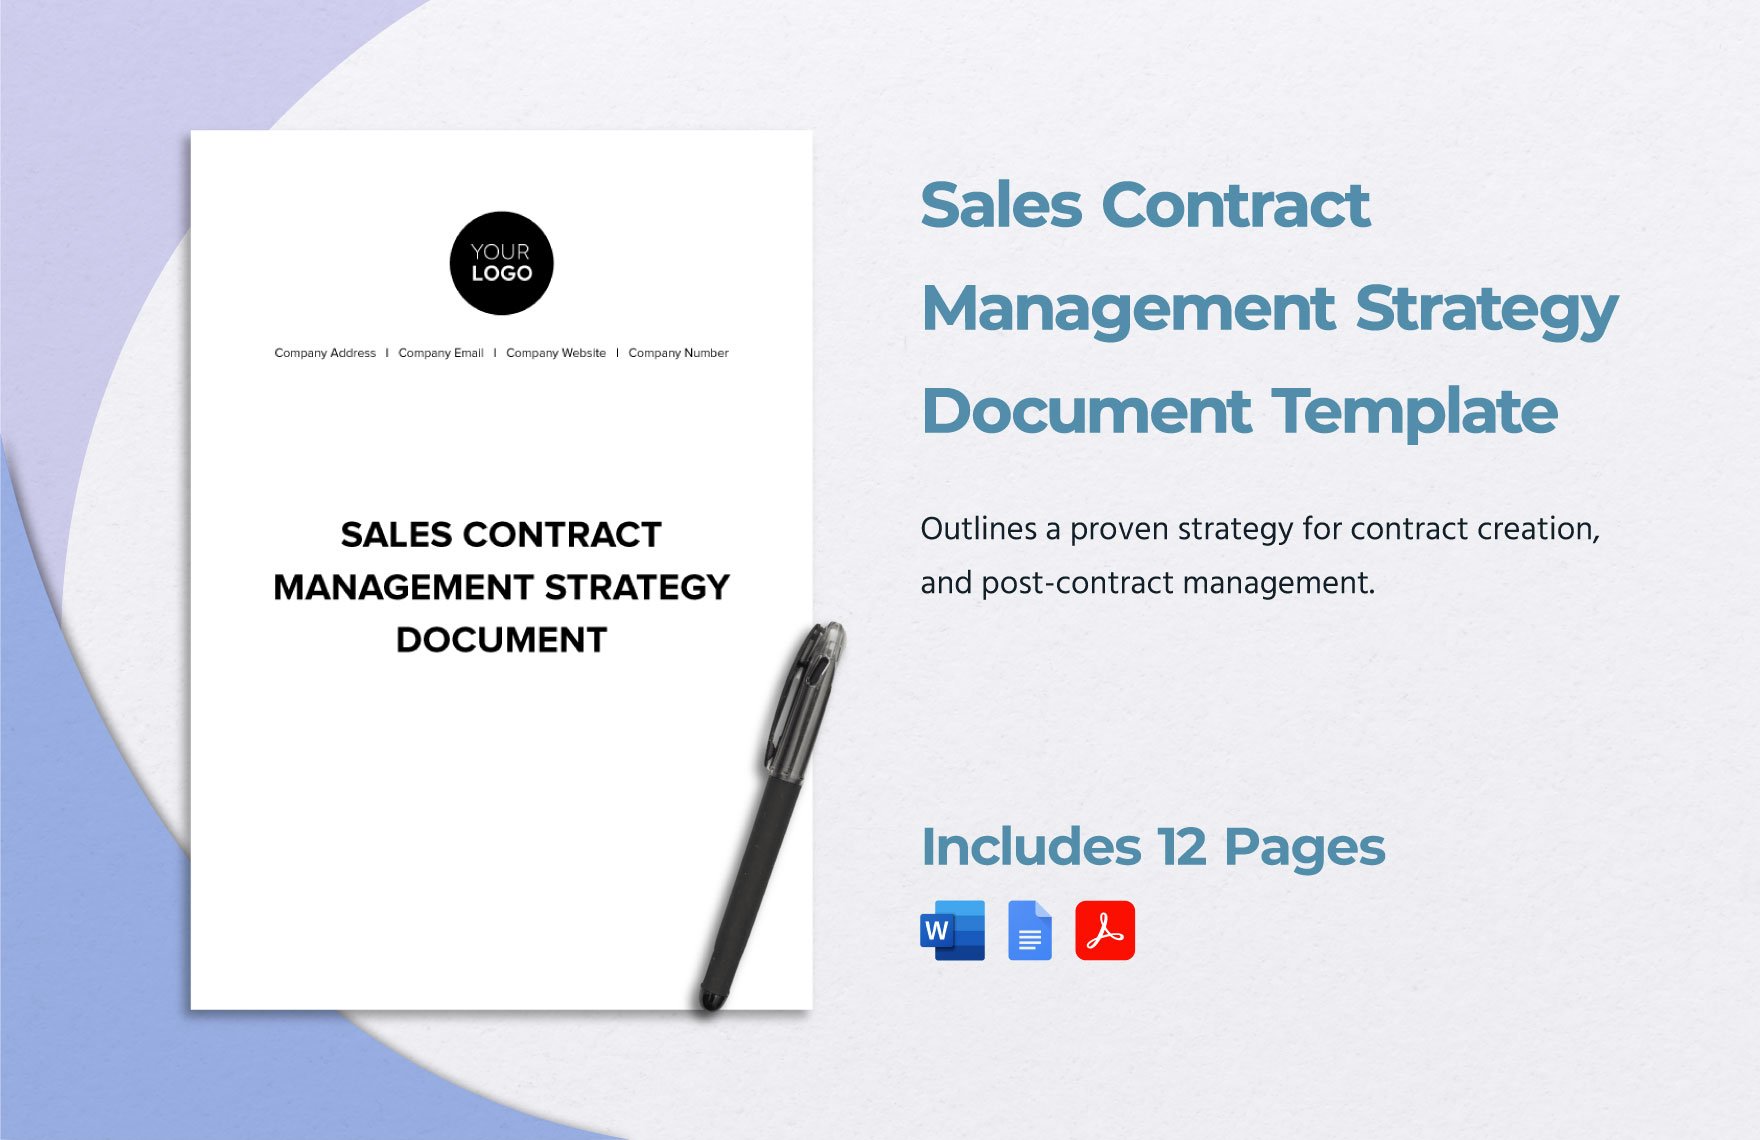 Sales Contract Management Strategy Document Template